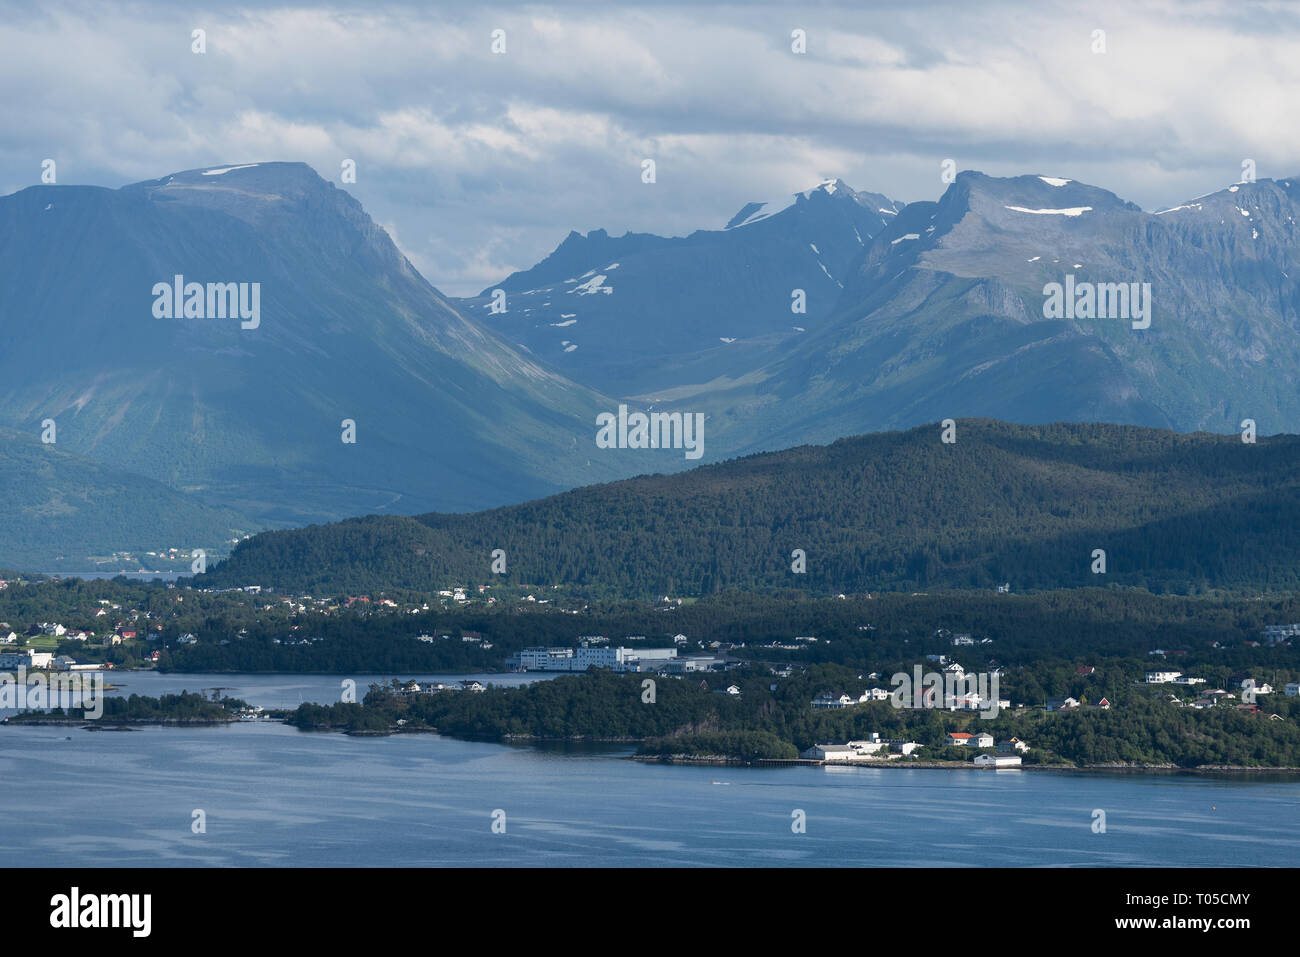 Norwegian landscape in summer. View from the mountain Aksla in the city of Alesund to the mountains of Skopphornet and Hundatinden, as well as the vil Stock Photo